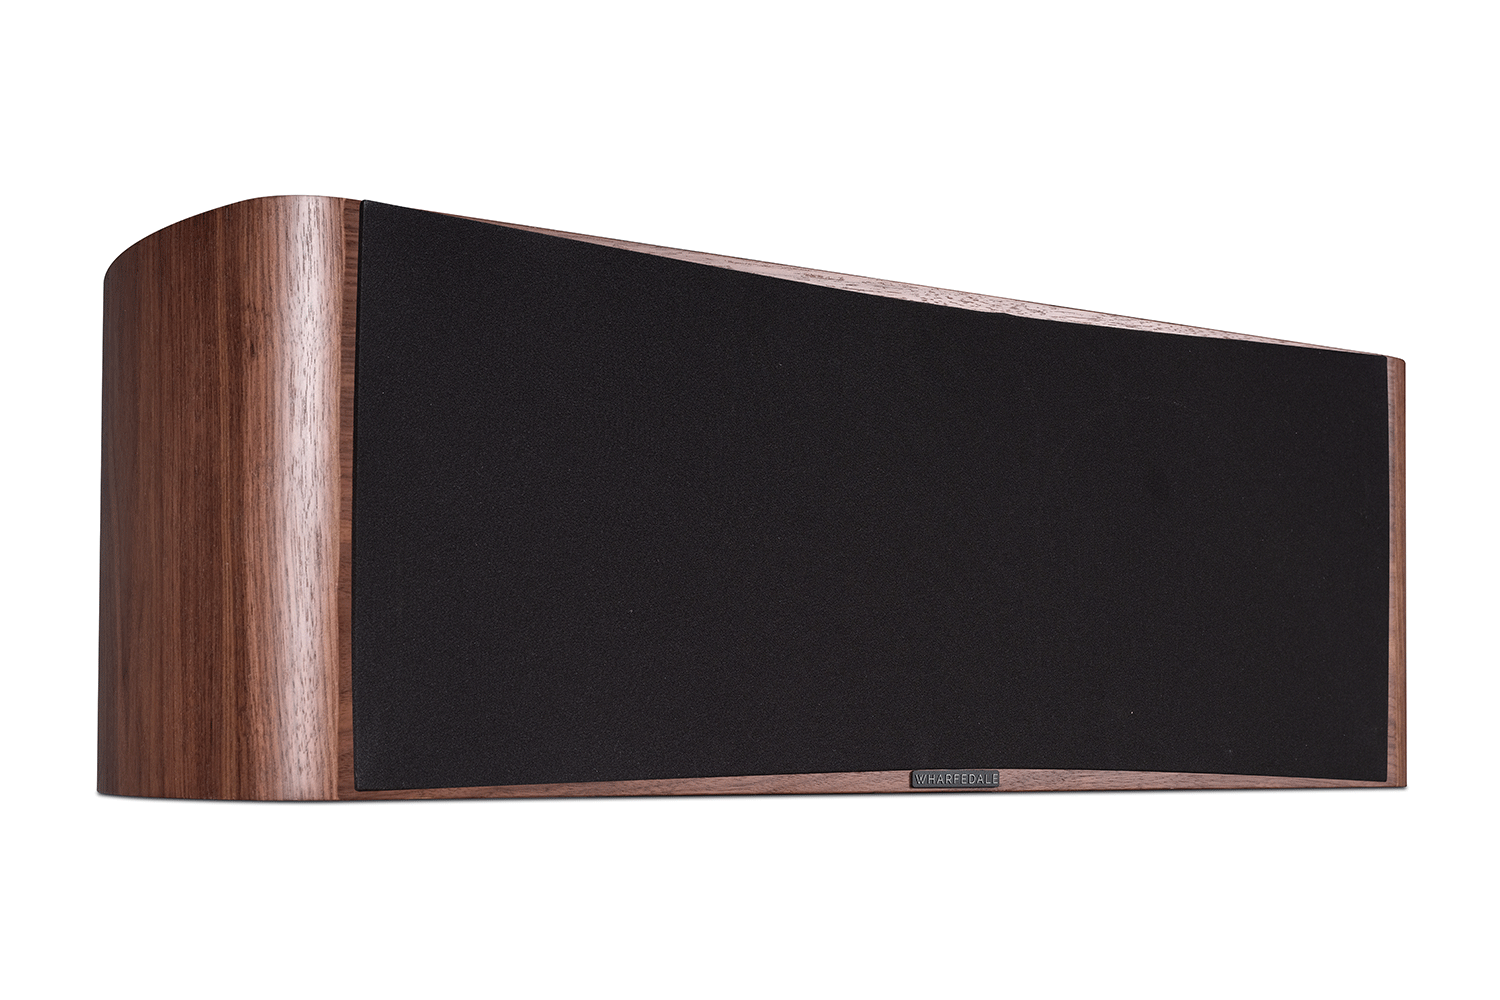 Wharfedale’s new EVO4 has grown out of the extensive research and development that produced the ELYSIAN flagship loudspeakers and borrows much of the technology involved in ELYSIAN.